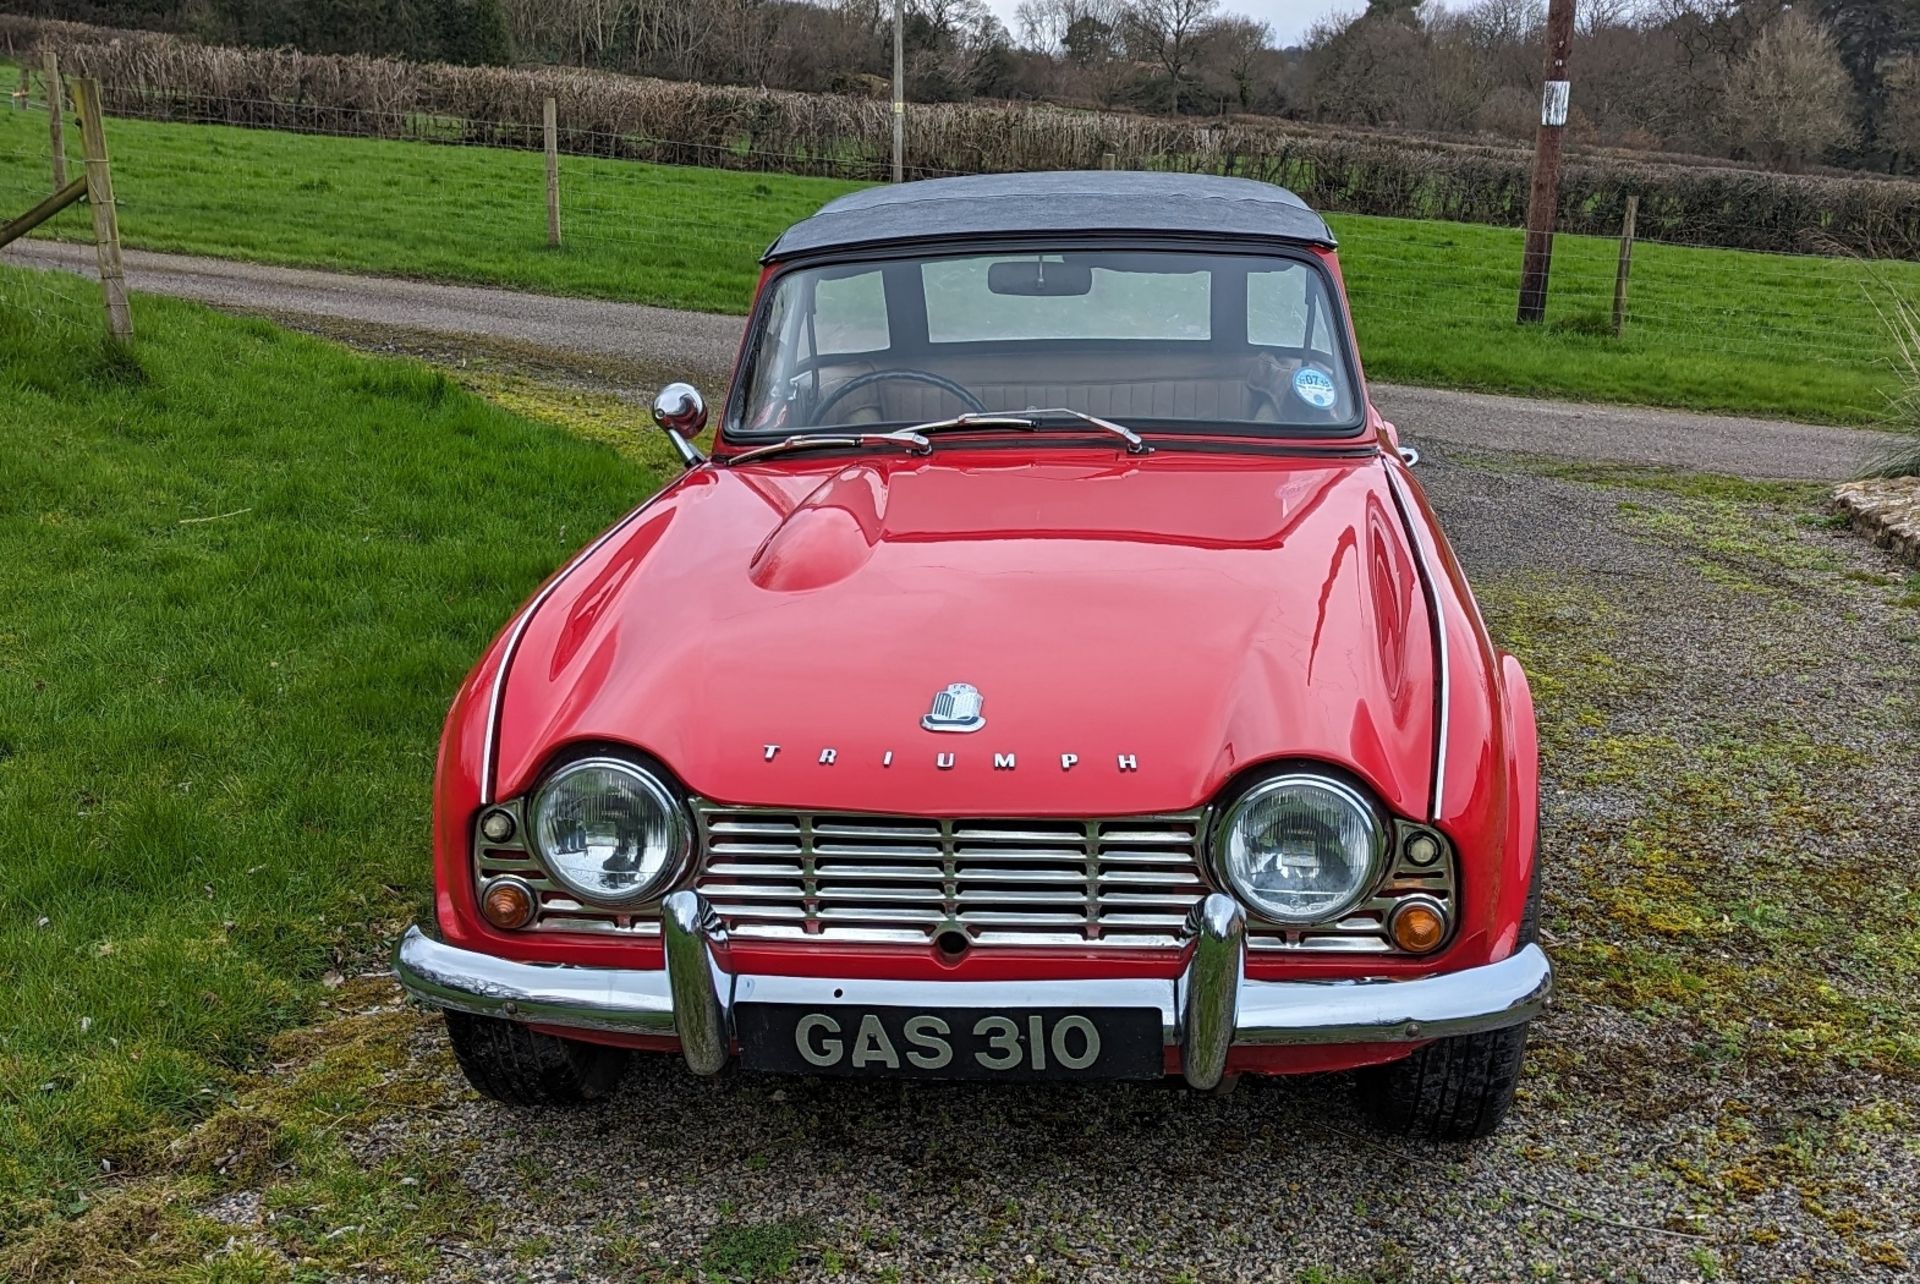 1962 Triumph TR4 Registration number GAS 310 Red with a tan interior Imported from South Africa - Image 2 of 8